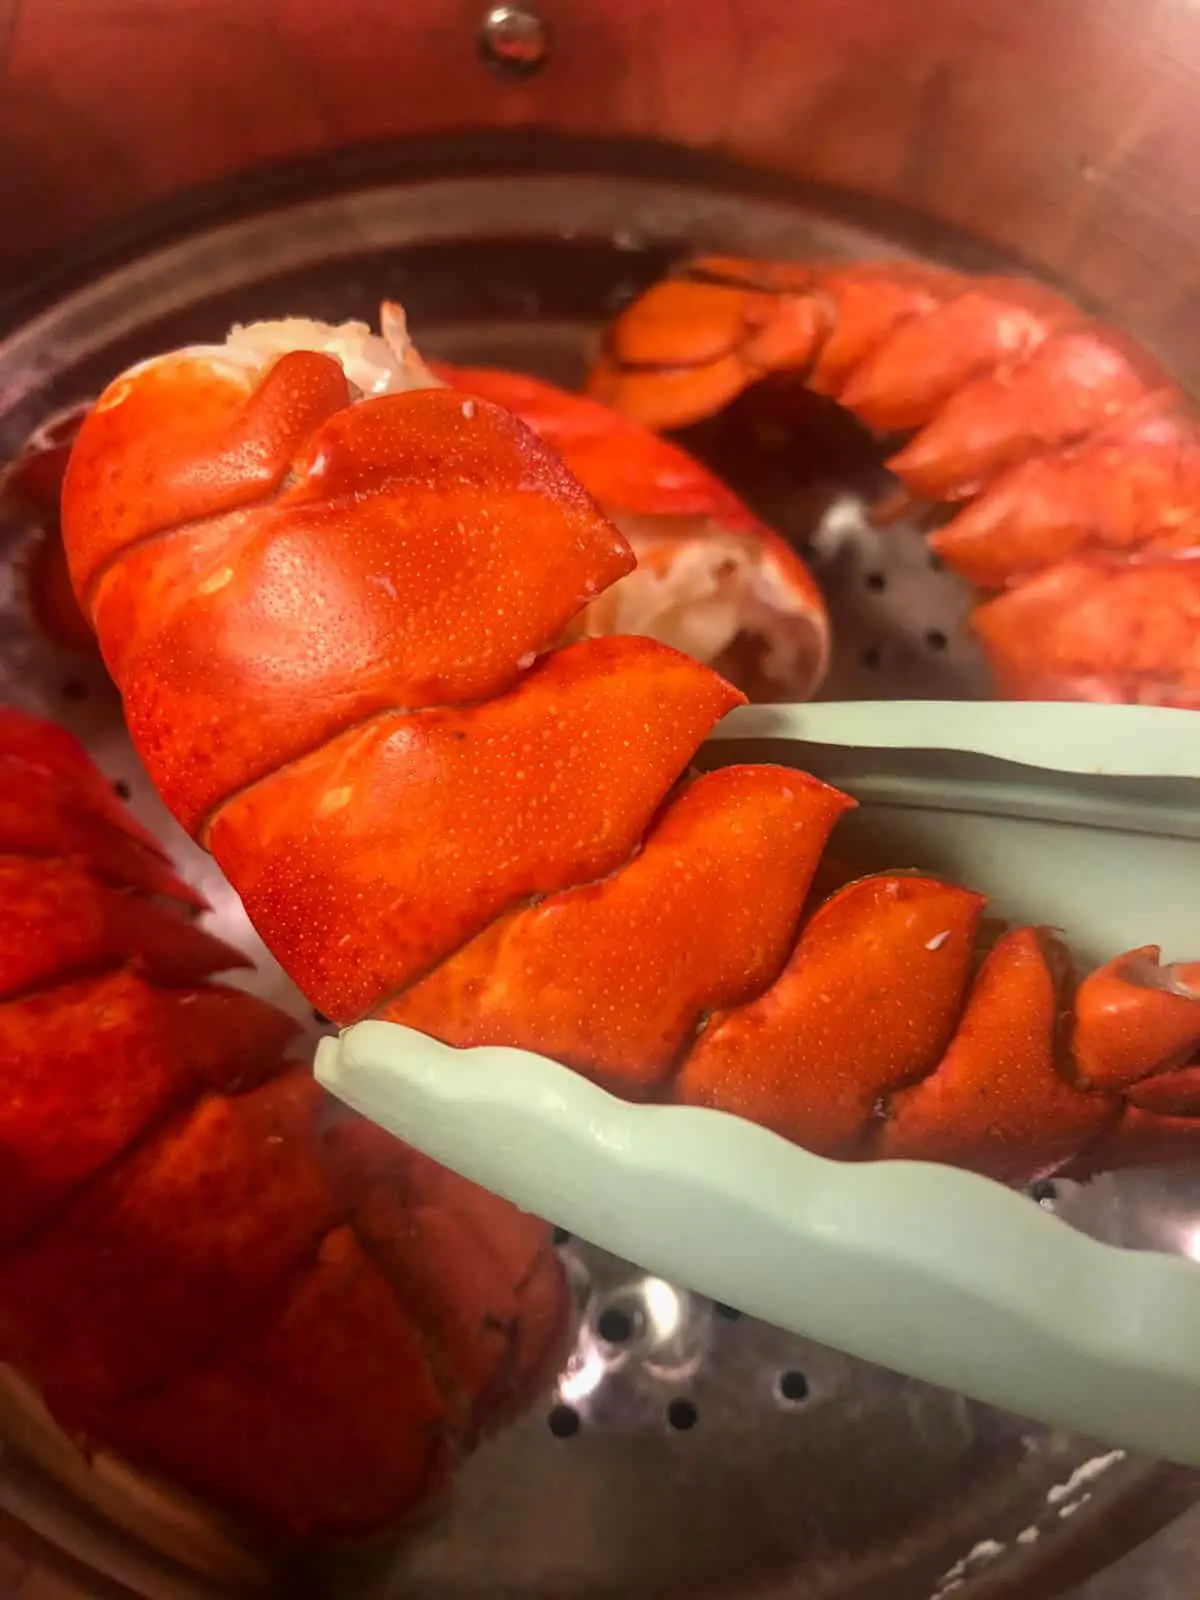 Bright red lobster tails in a steamer with blue tongs holding one of the tails.